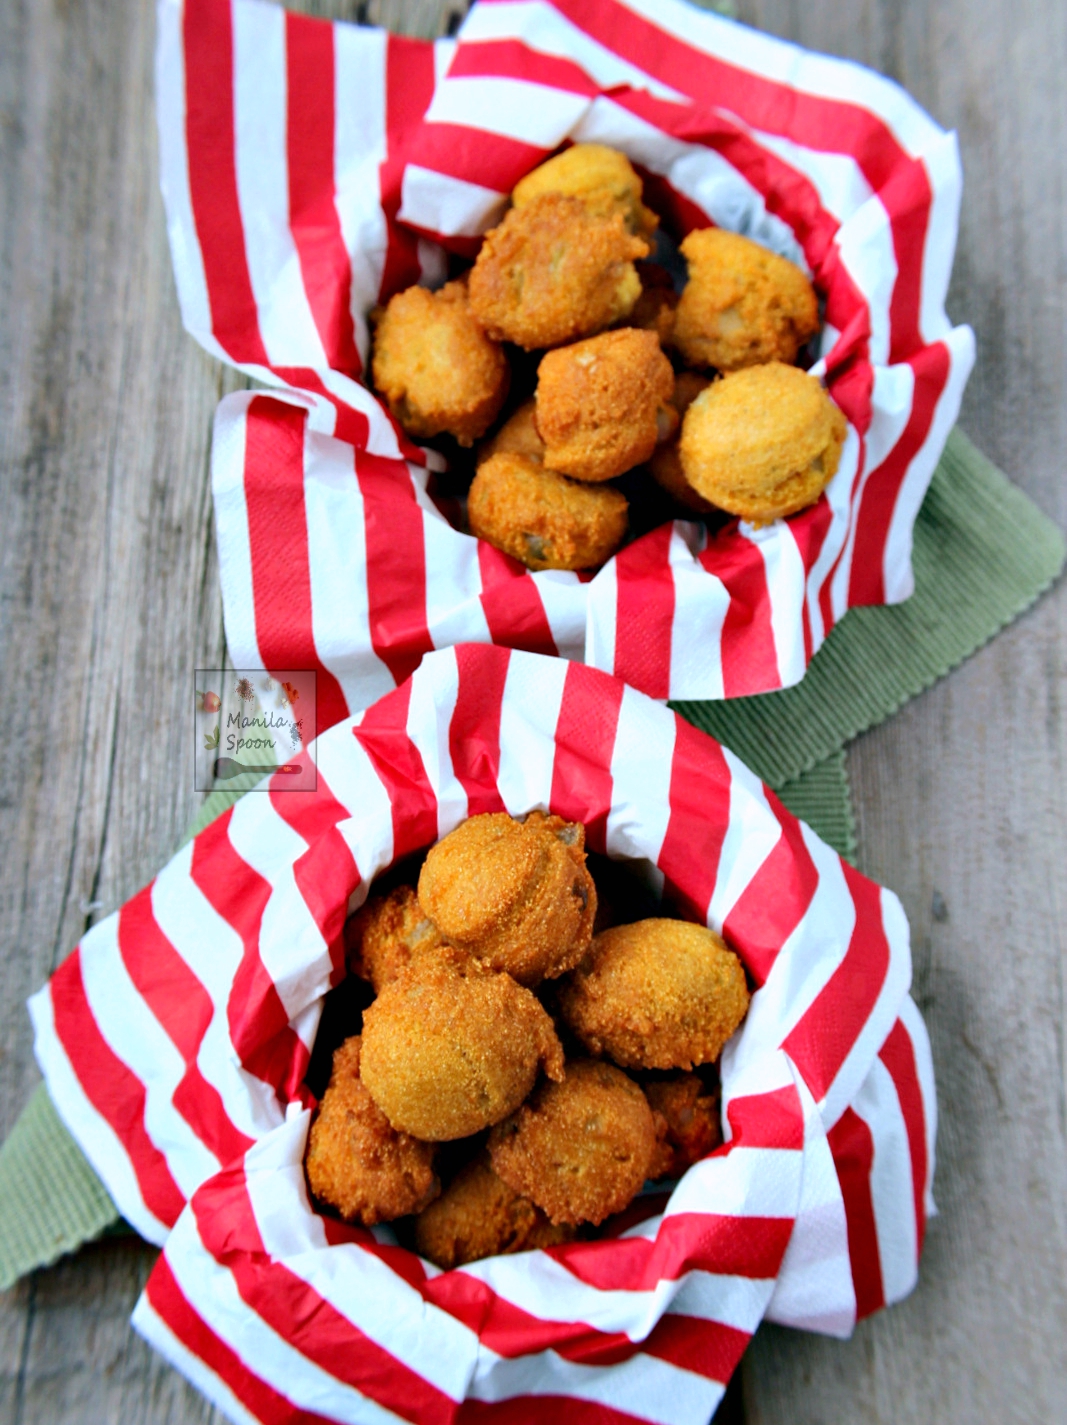  These delicious cornmeal fritters (hush puppies) flavored with garlic and onions are the perfect savory nibbles or side dish!